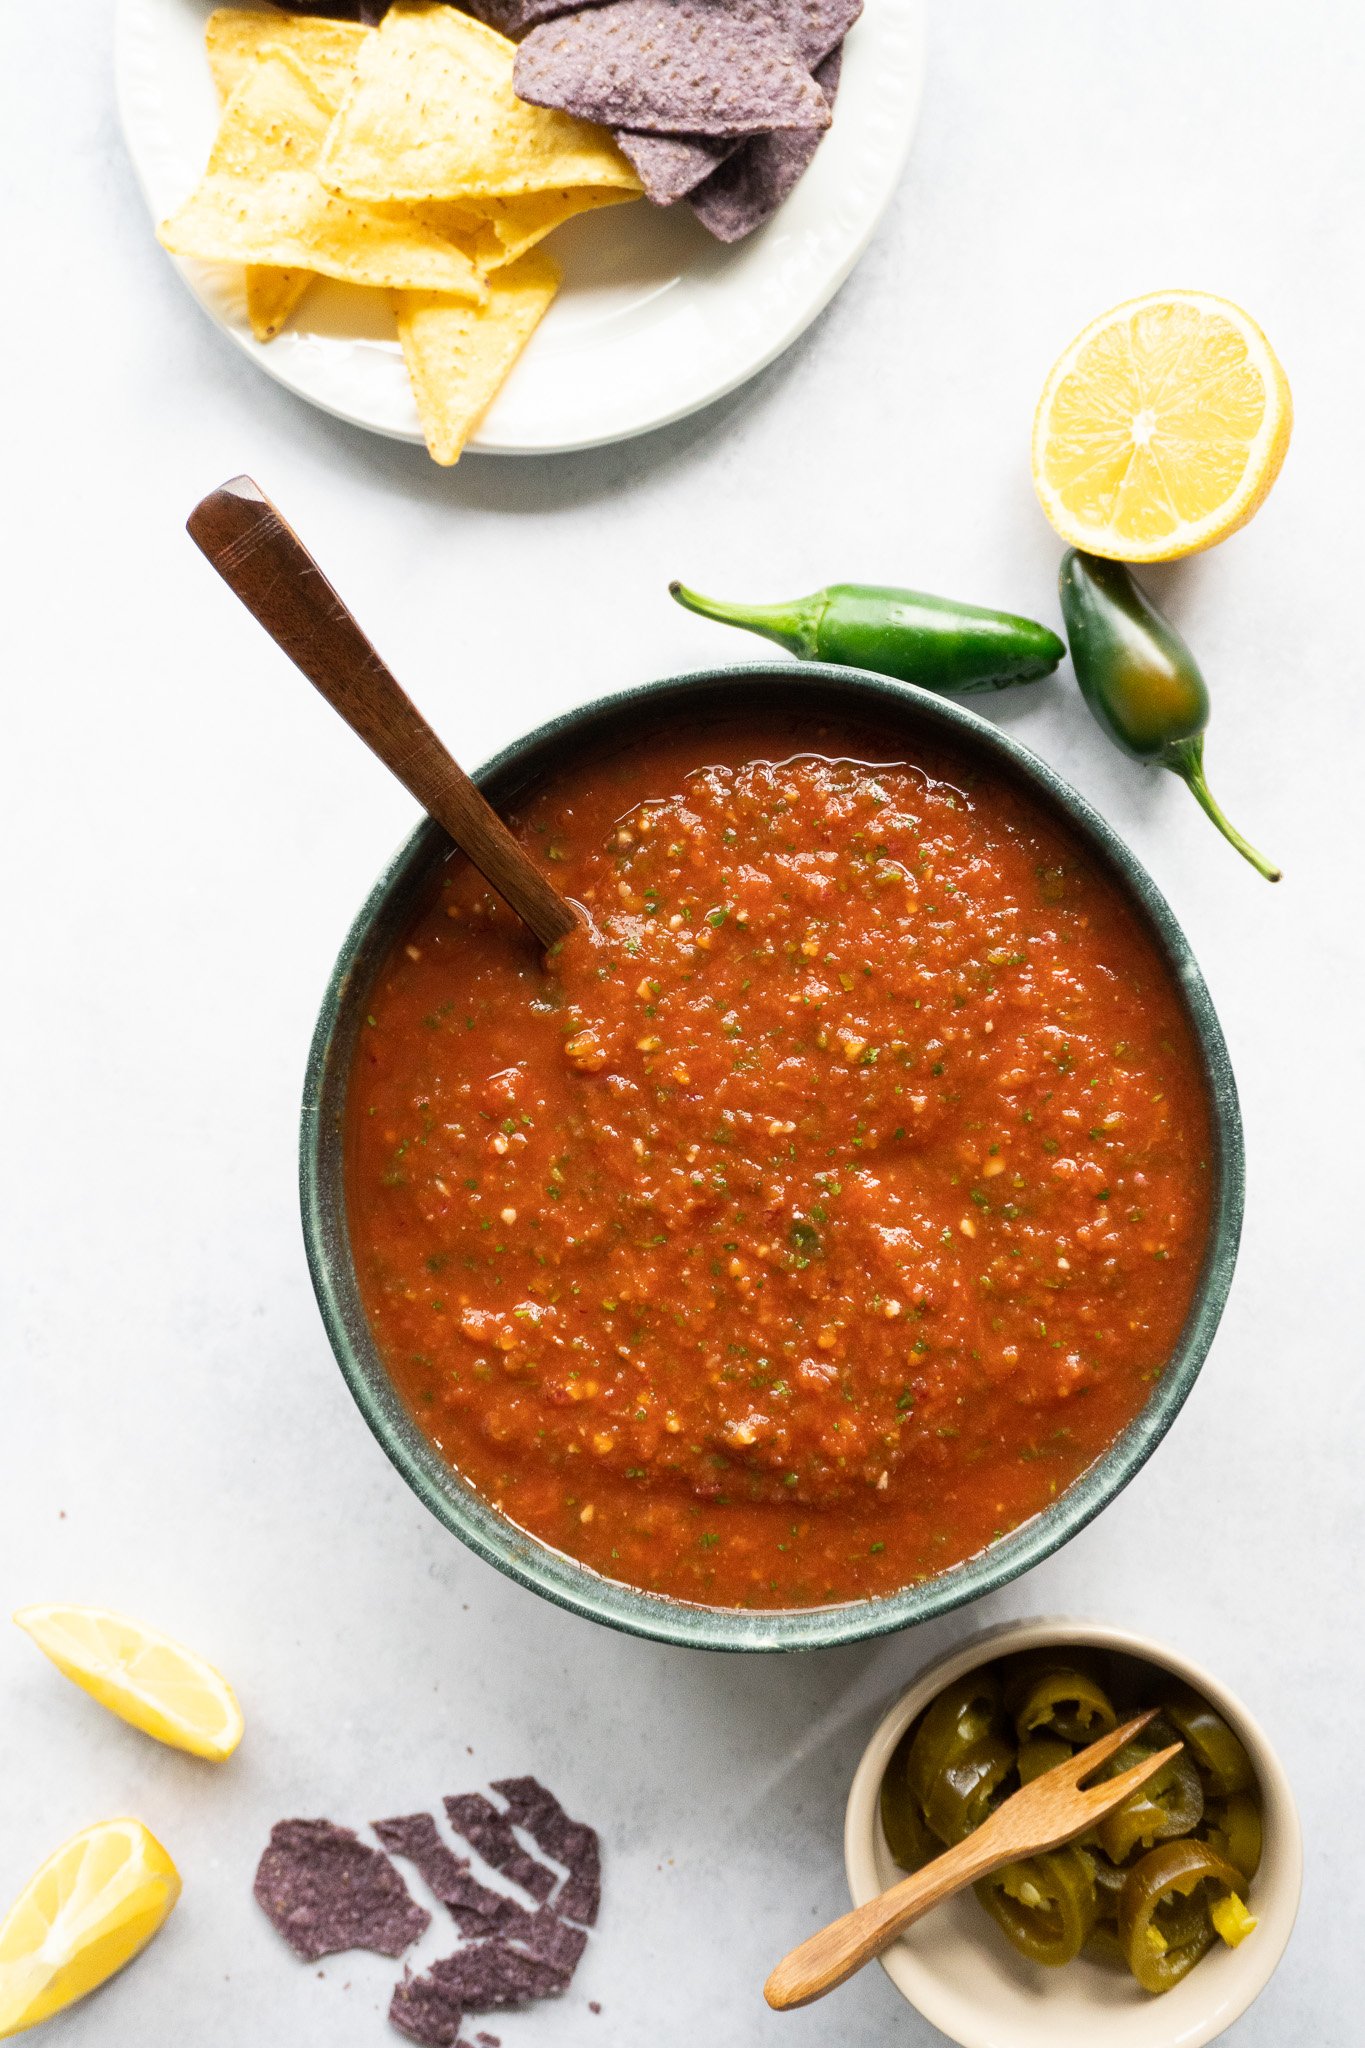  A tempting visual of homemade tomato salsa, inspired by the beloved Costco recipe. Diced tomatoes, finely chopped red onions, minced garlic, and a sprinkle of fresh cilantro come together in a vibrant and appetizing salsa.